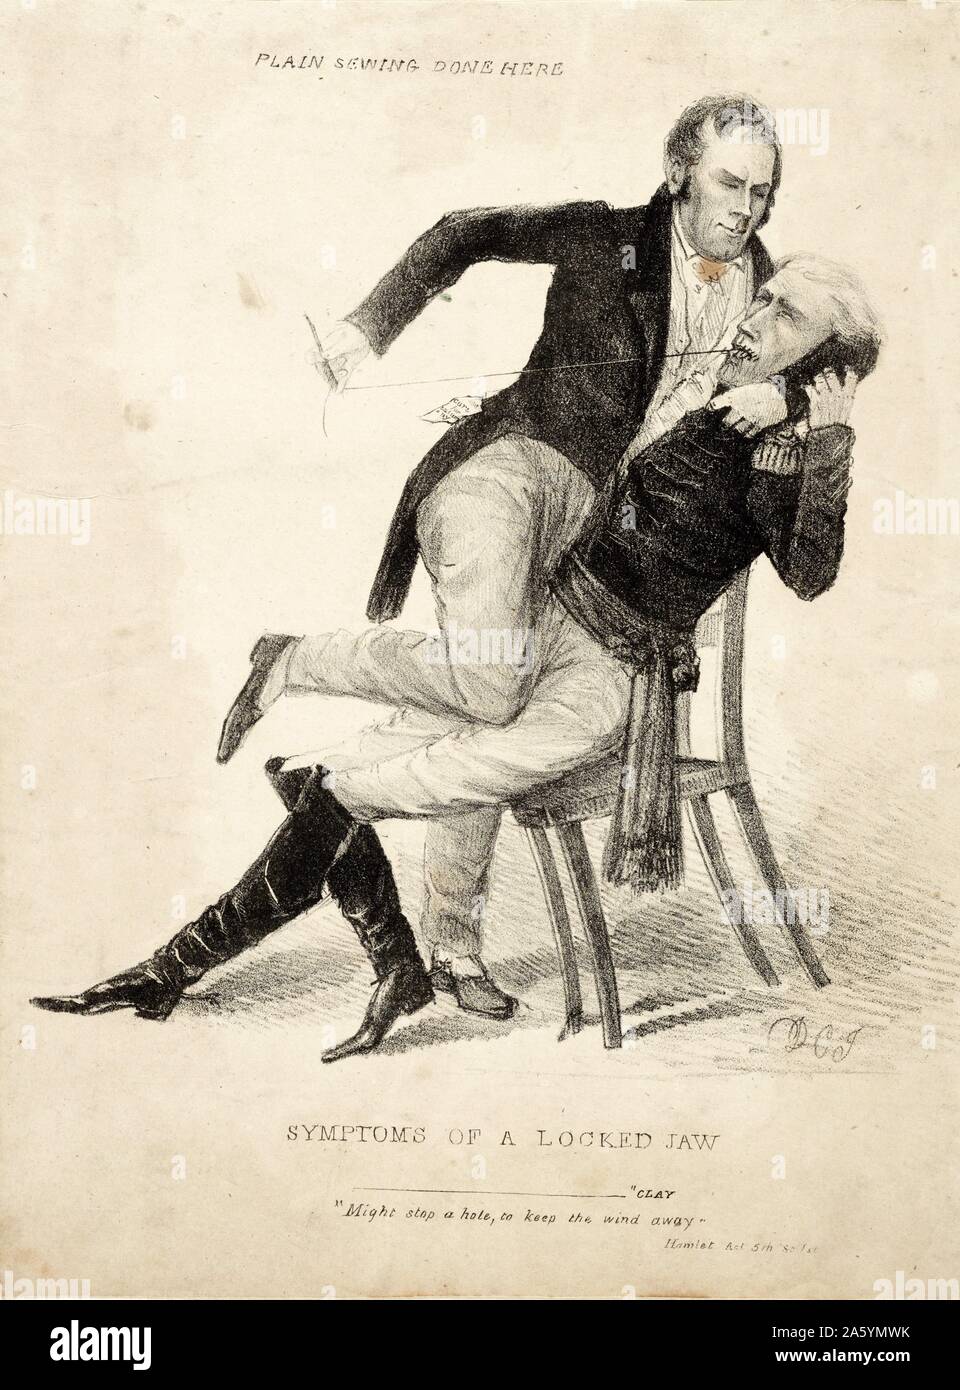 Symptoms of a locked jaw. Plain sewing done here. by David Claypoole Johnston. Circa 1834. Lithograph print on wove paper. Political cartoon representing the feud between Henry Clay and President Andrew Jackson between 1832-1836. During which they battled over the future of the Bank of the United States. The image shows Clay restraining Jackson whilst forcefully sewing up his mouth. Behind them are the words 'Plain sewing done here.' Stock Photo